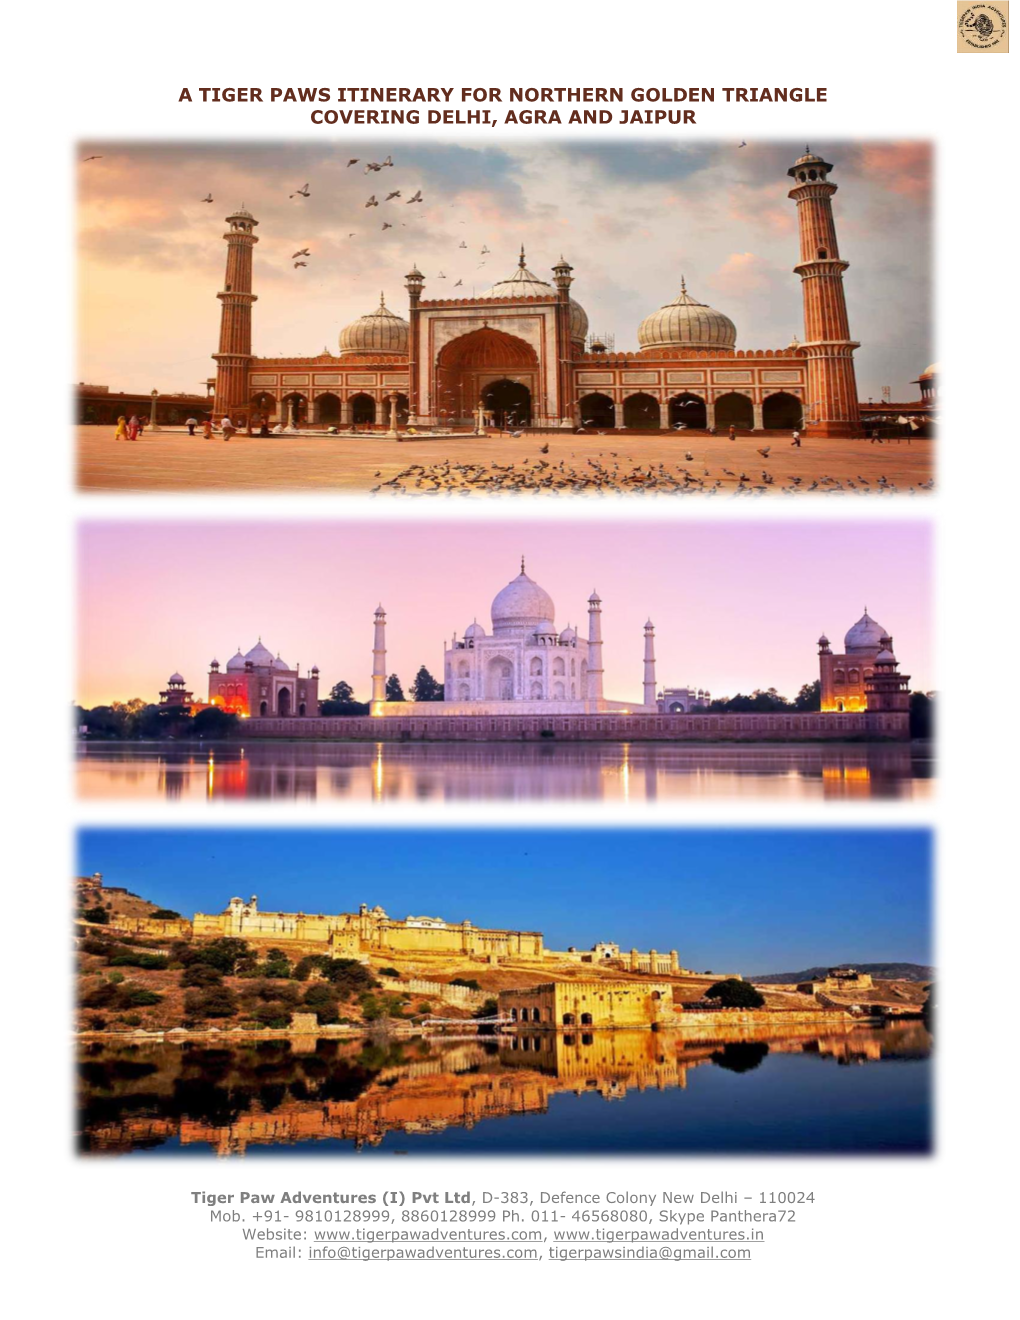 A Tiger Paws Itinerary for Northern Golden Triangle Covering Delhi, Agra and Jaipur